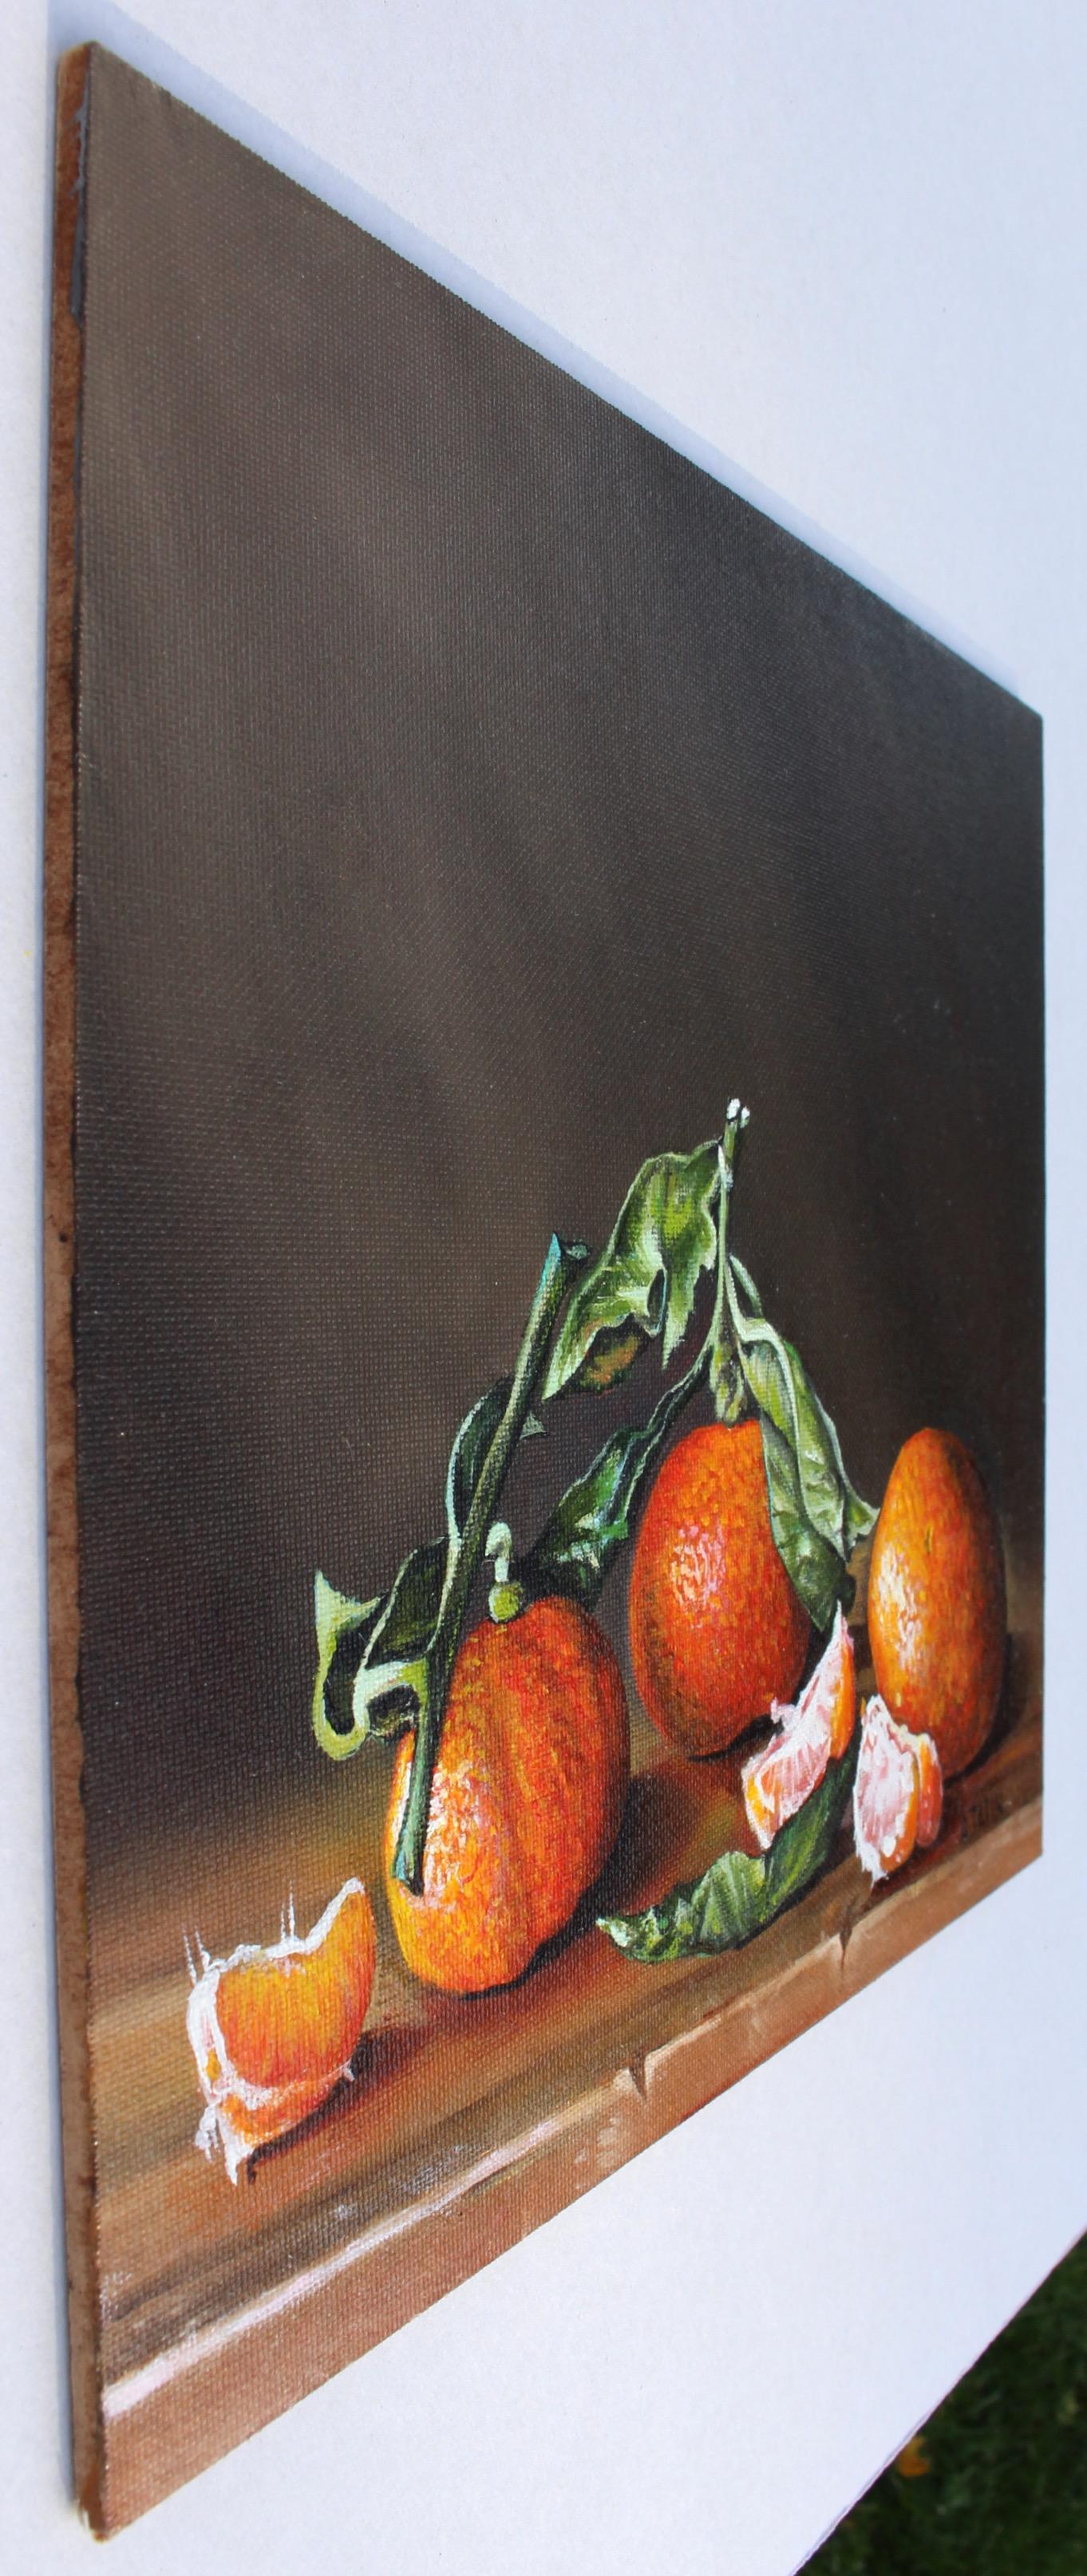 <p>Artist Comments<br>This still-life oil painting presents satsuma mandarins on a wooden surface. The rendering of light and shadow makes the fruits' shape and the leaves crisp texture more defined, while the dark background brings out their vivid